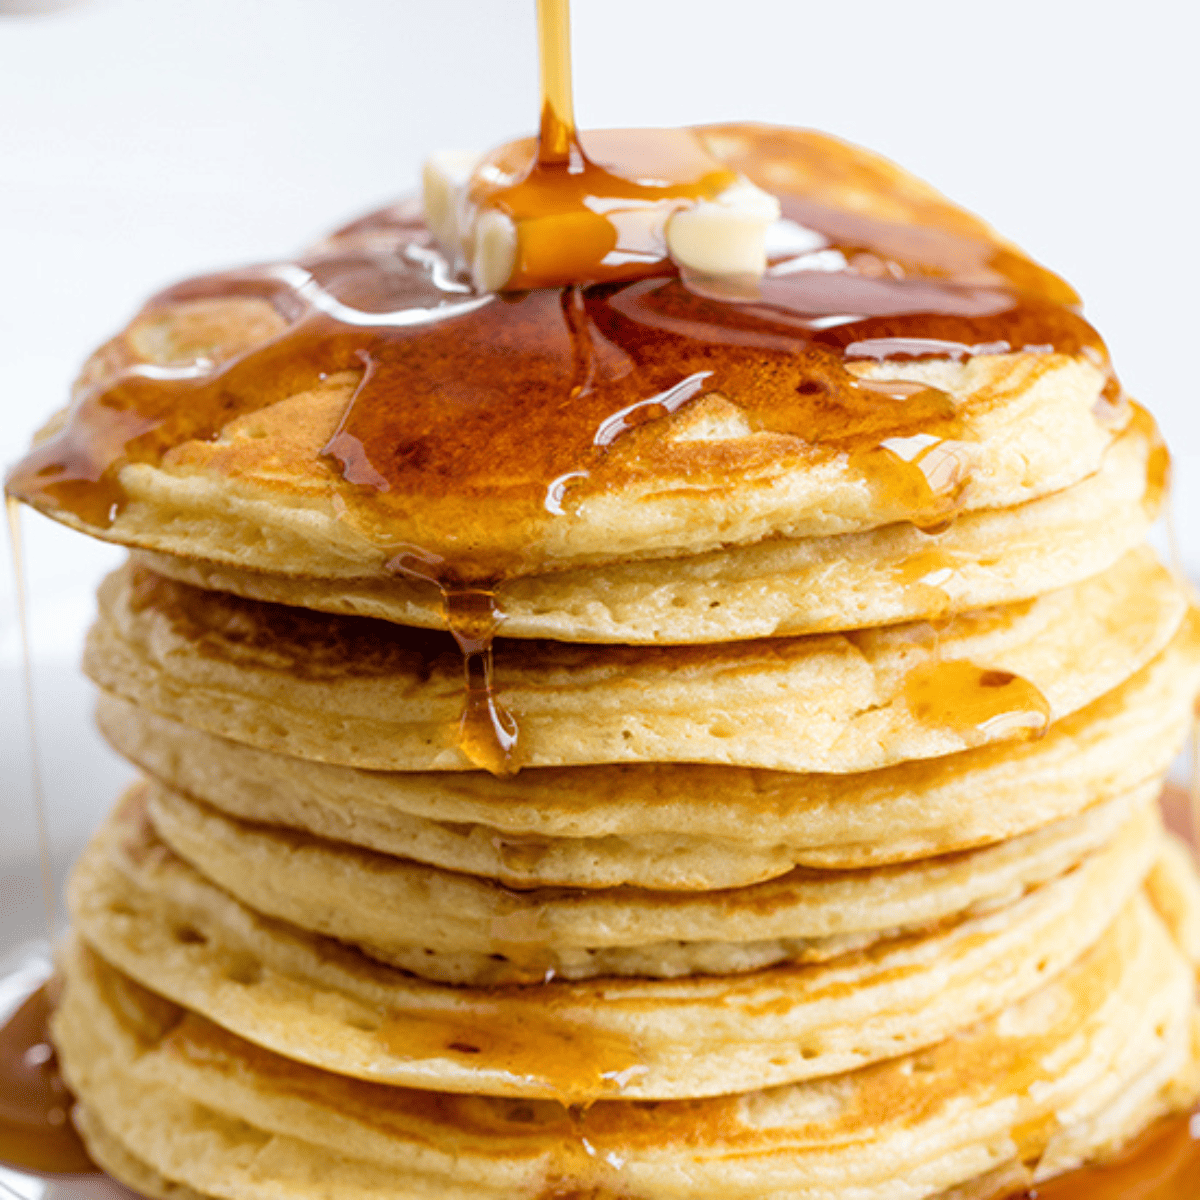 A stack of pancakes with syrup being poured on top.